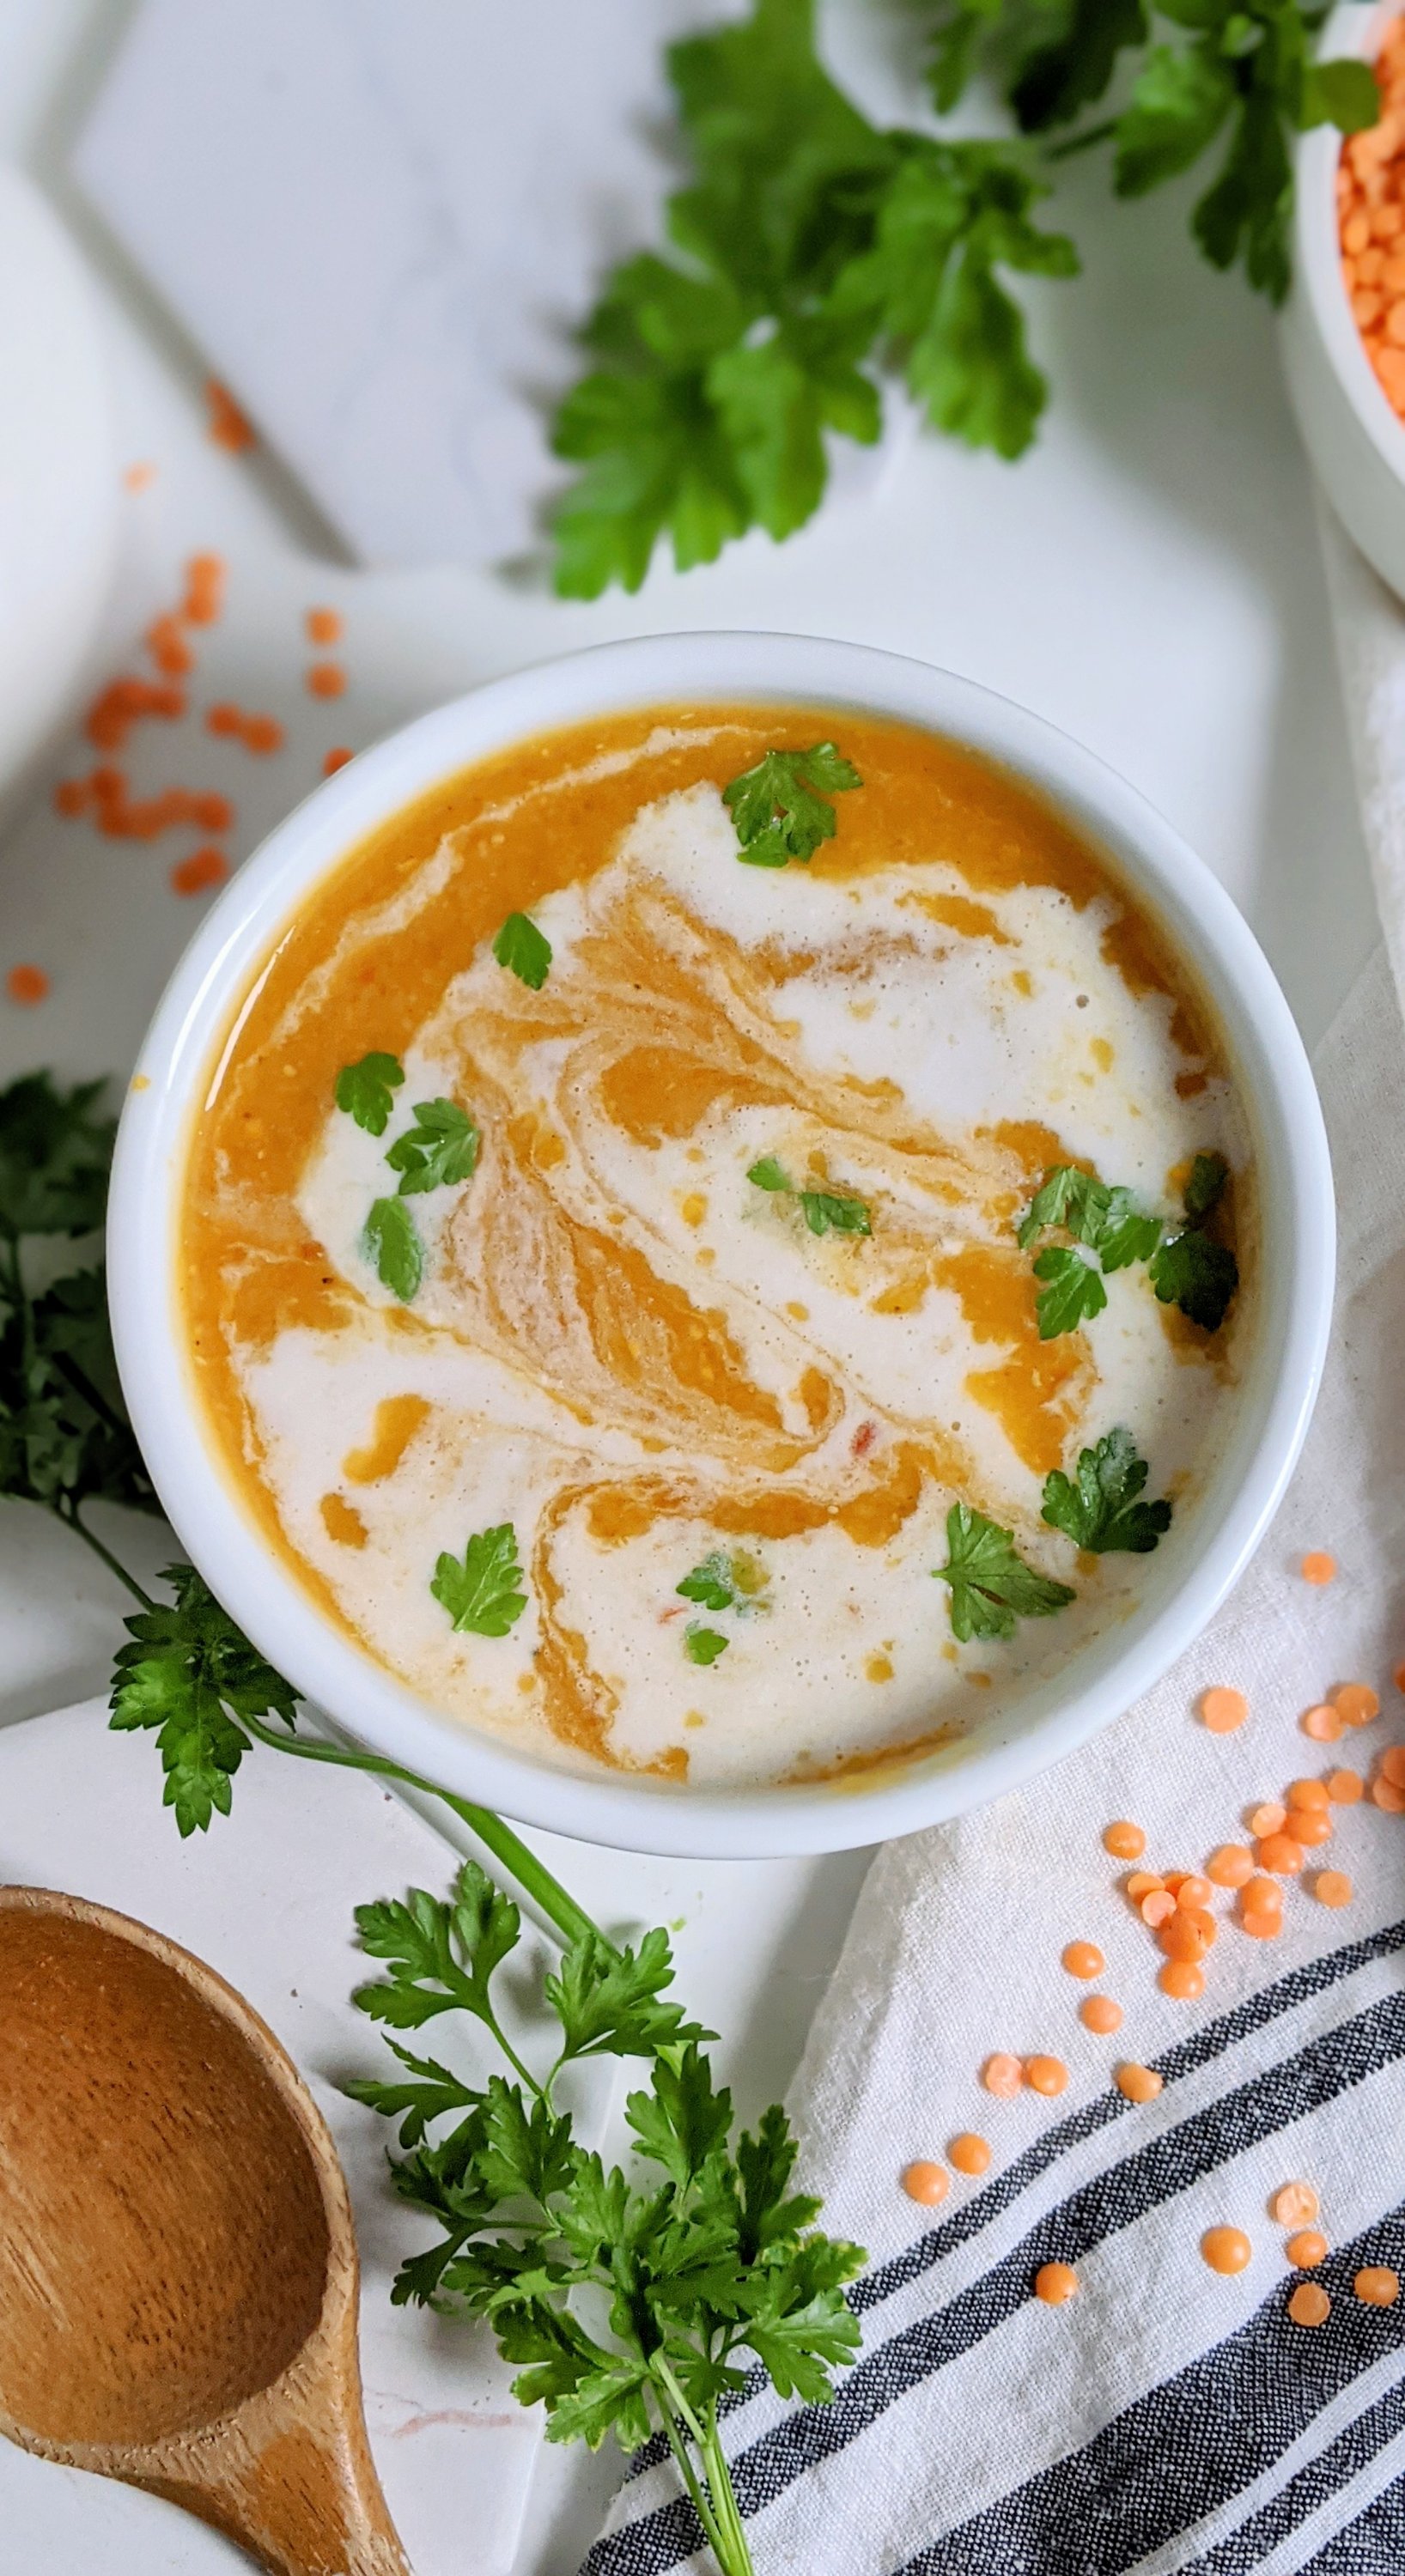 dairy free butternut squash soup recipe vegan gluten free coconut milk lentil soup with fall squash recipes healthy whole foods plant based